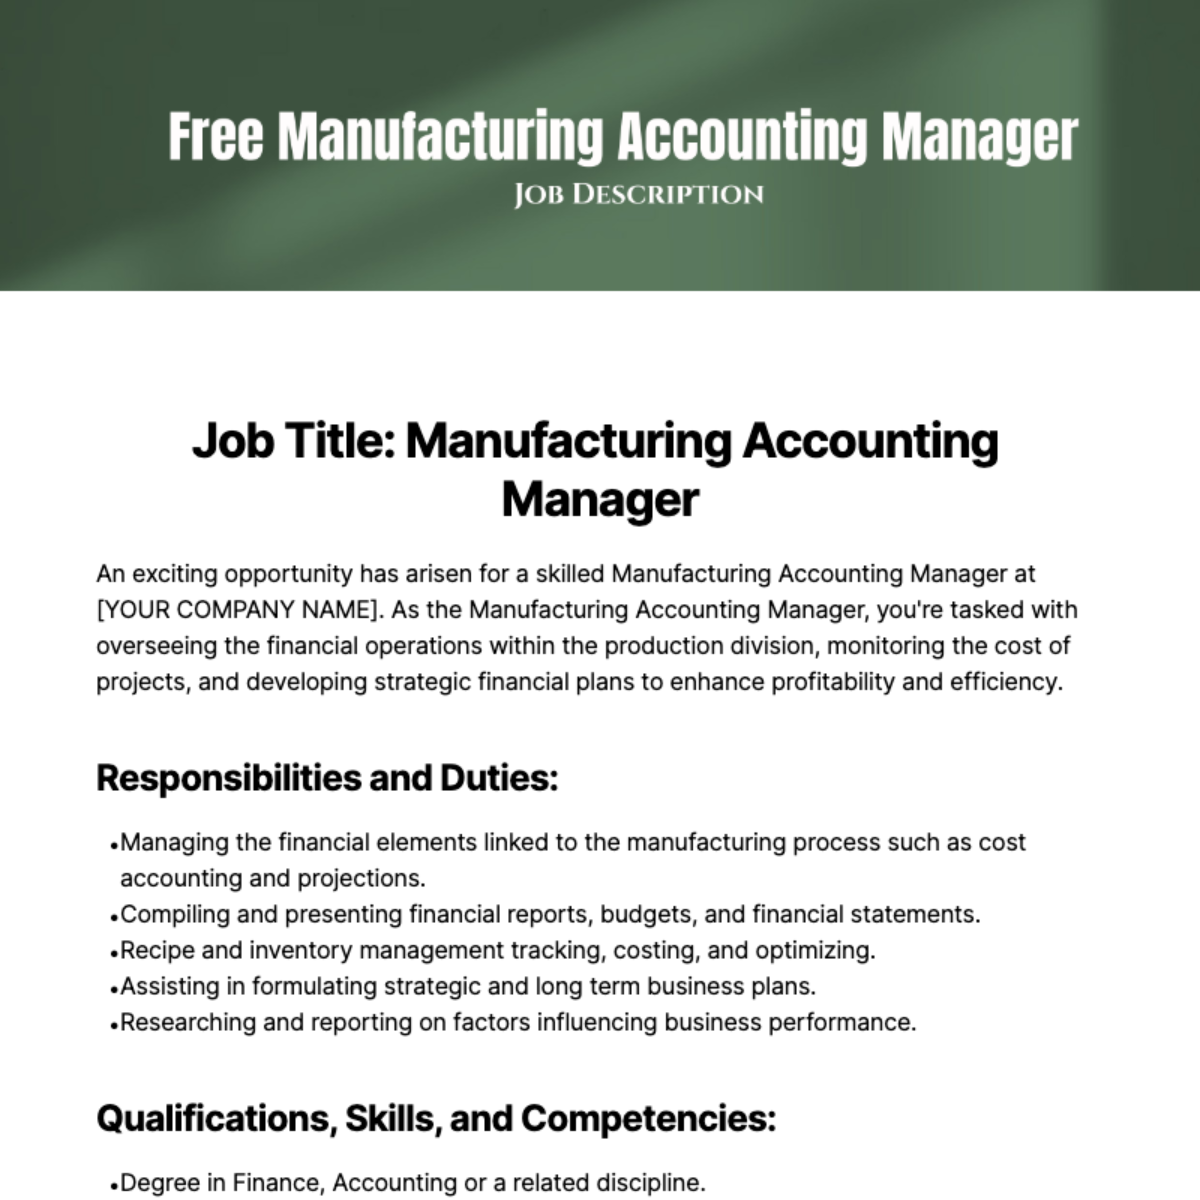 Free Manufacturing Accounting Manager Job Description Template